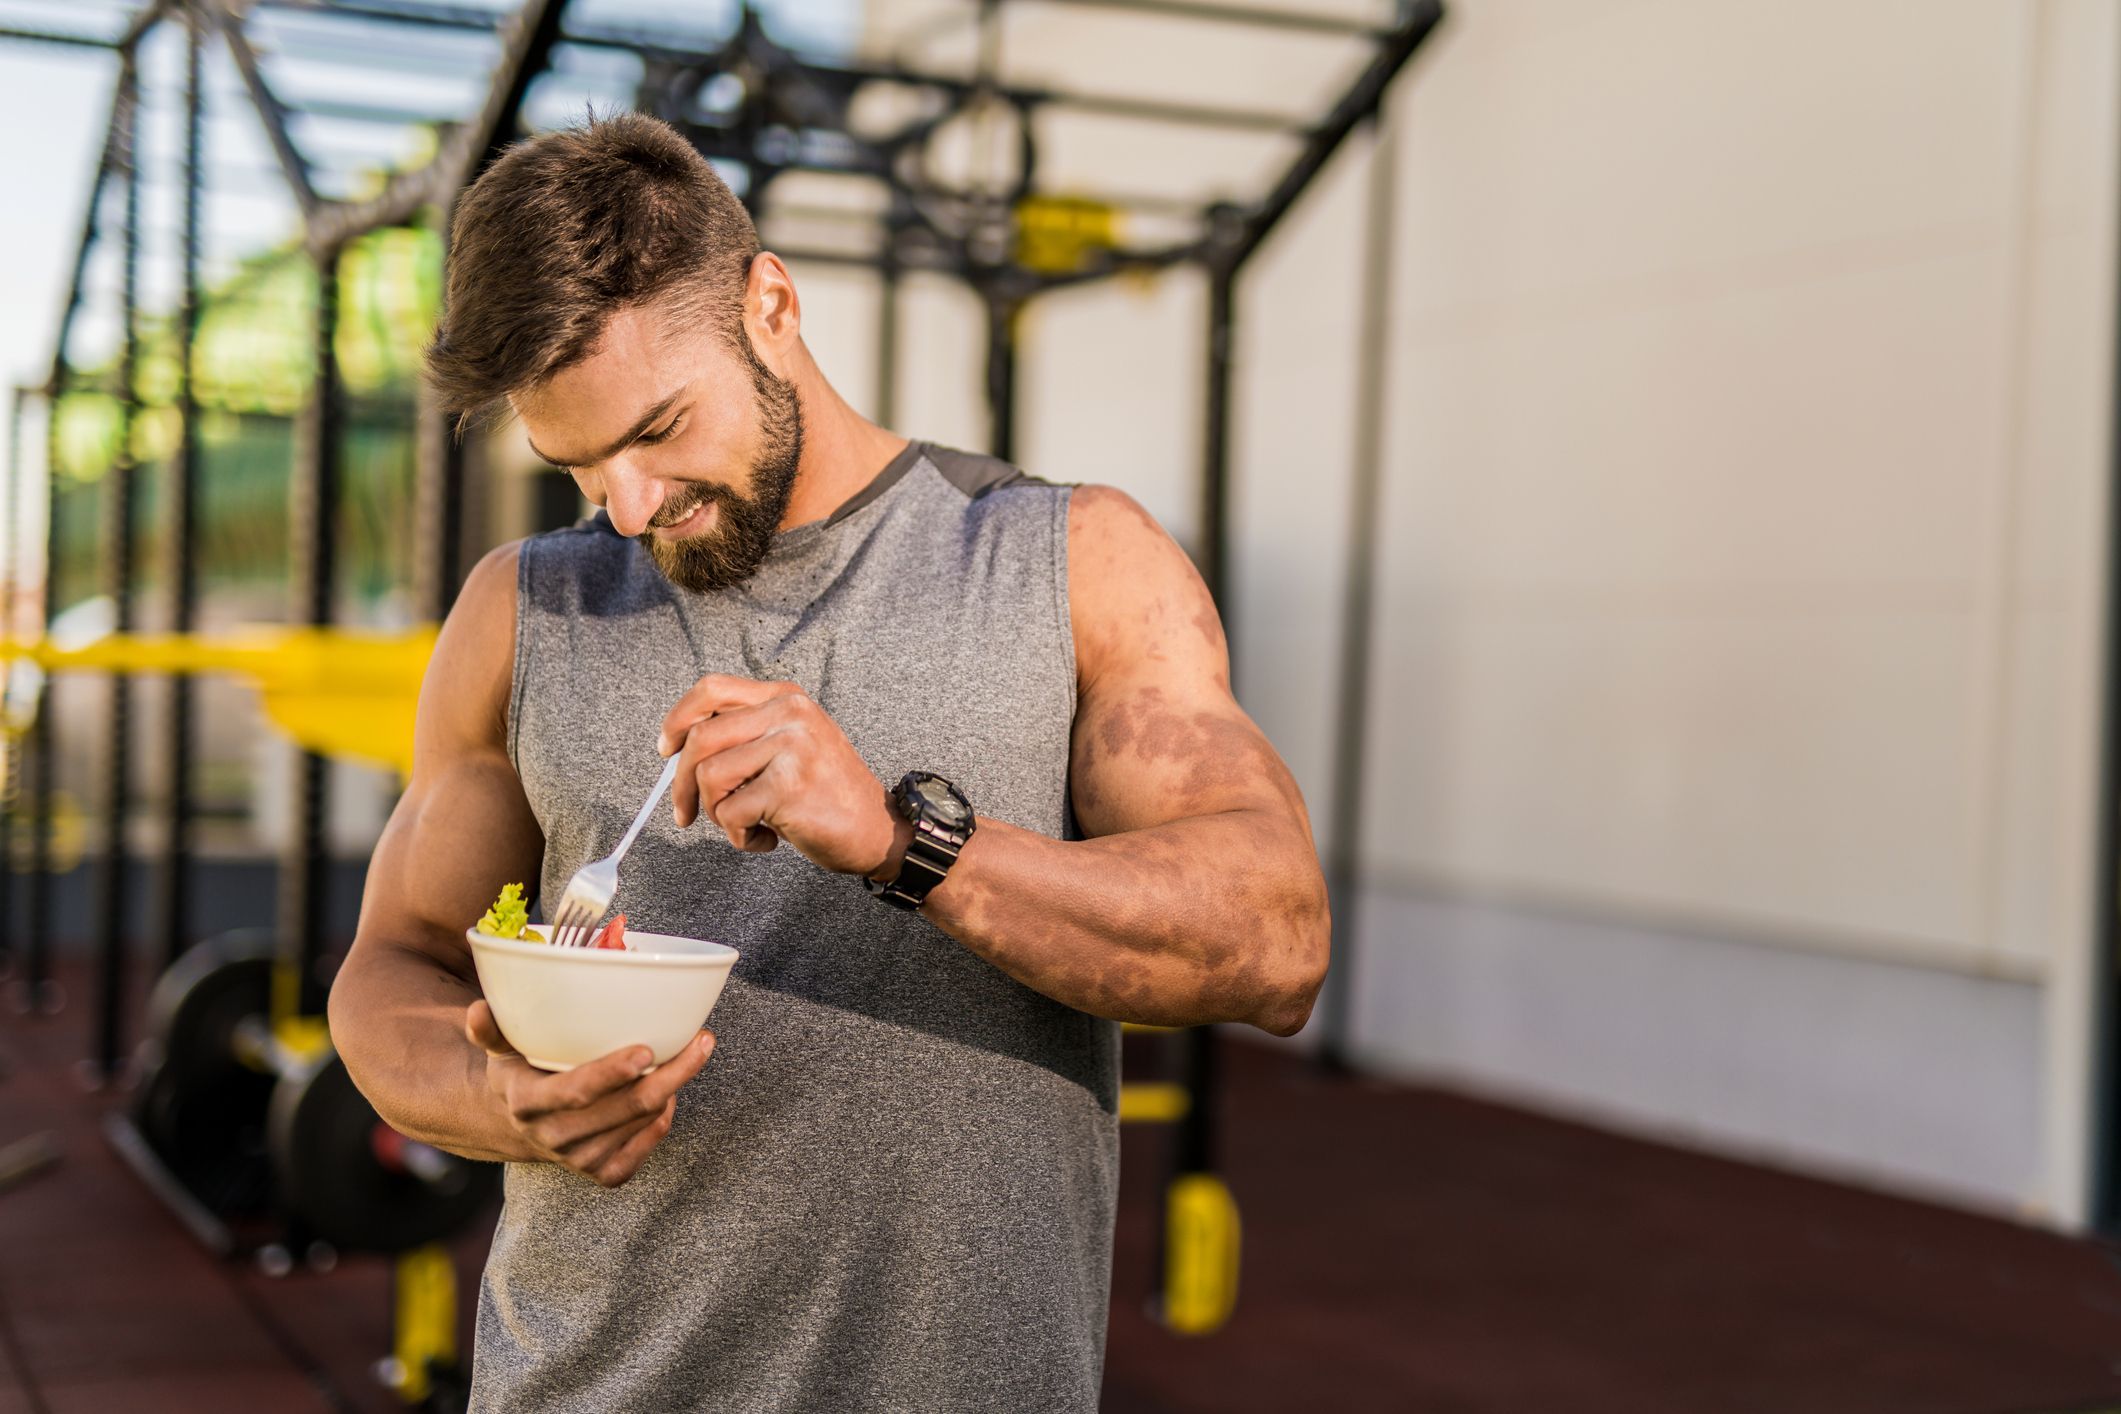 What Happens If You Take Pre-Workout Without Working Out